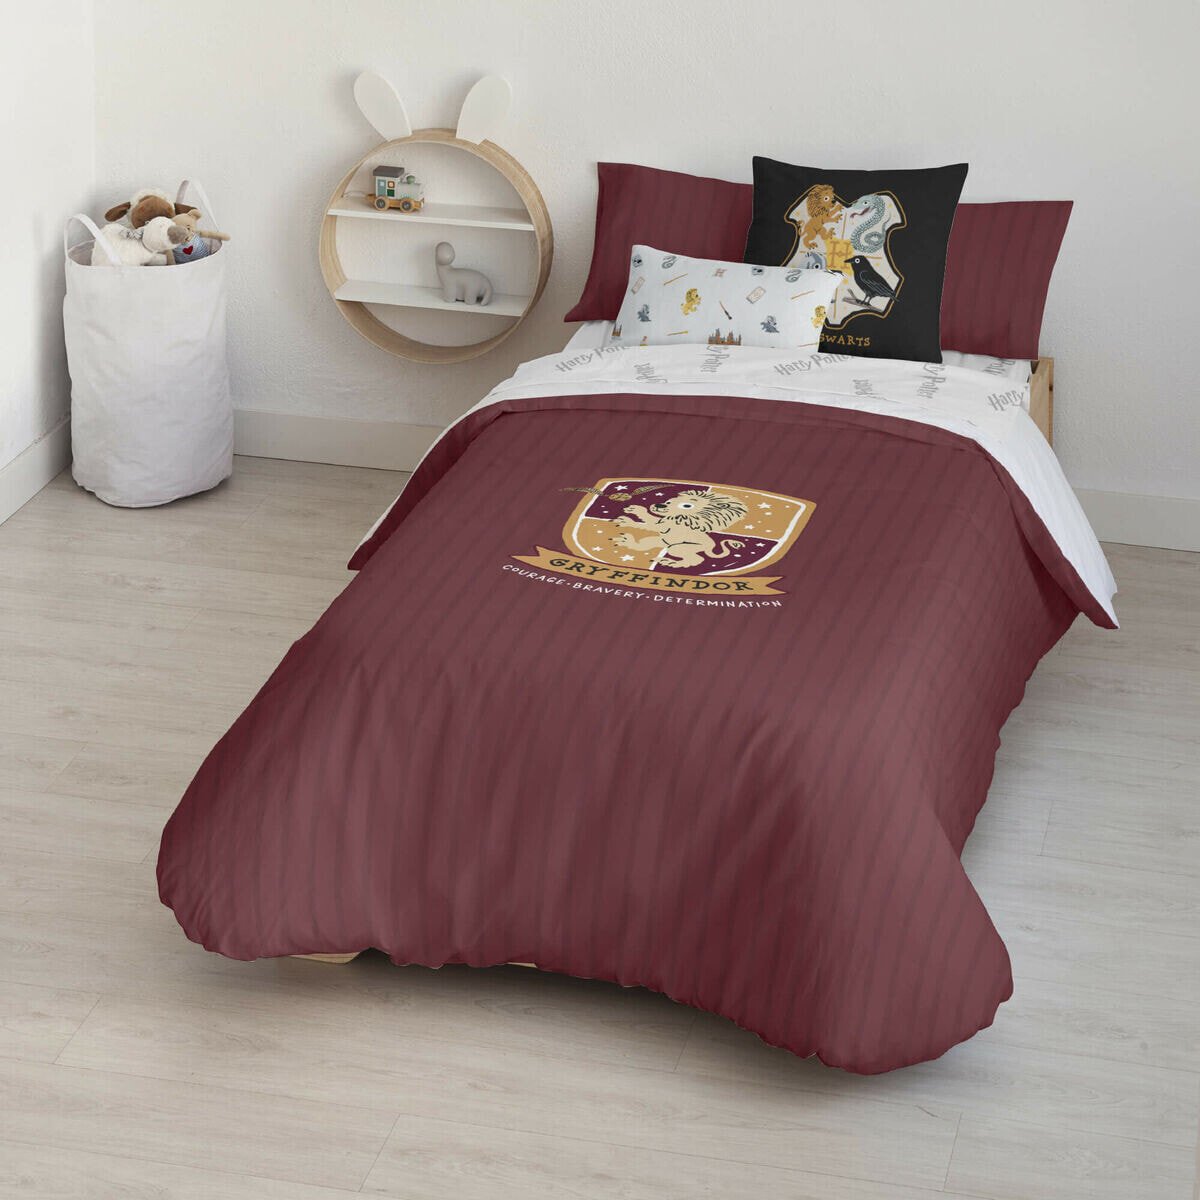 Nordic cover Harry Potter Gryffindor Single 140 x 200 cm